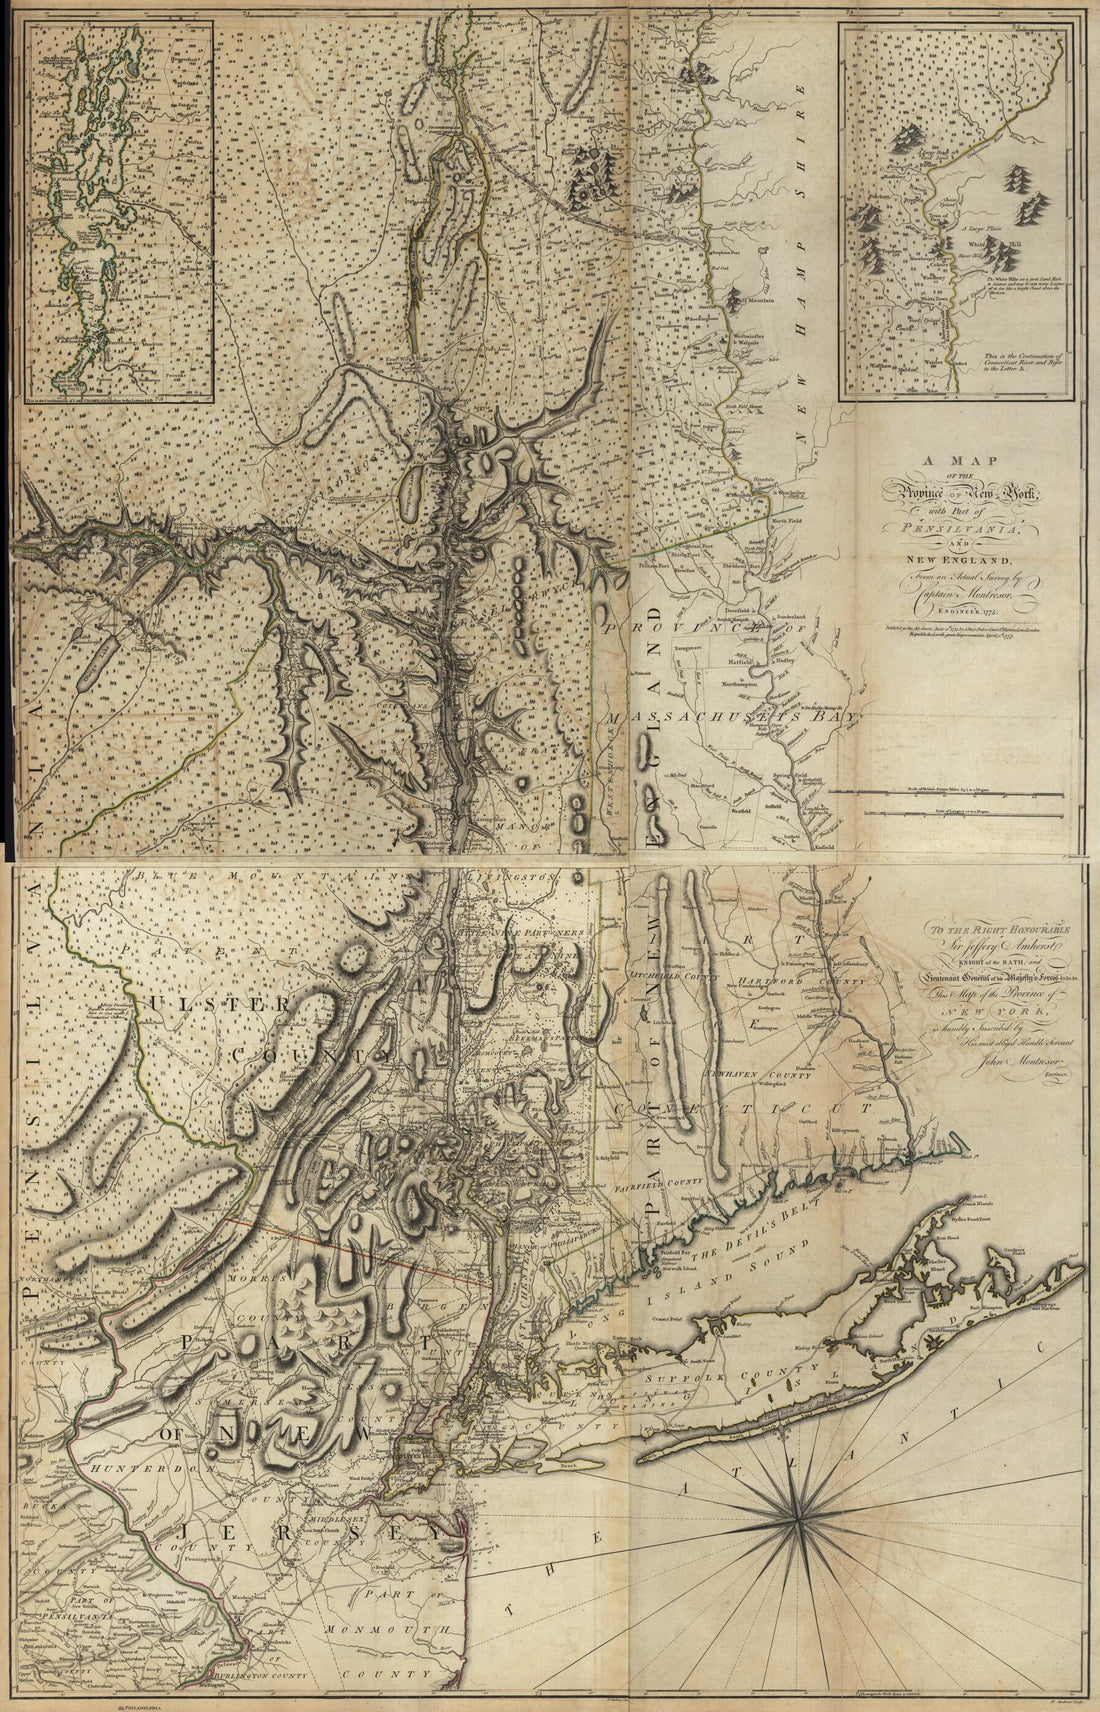 This old map of A Map of the Province of New York With Part of Pensylvania and New England from the North American Atlas, Selected from the Most Authentic Maps, Charts, Plans, &amp;c. Hitherto Published. from 1777 was created by Thomas Jefferys in 1777